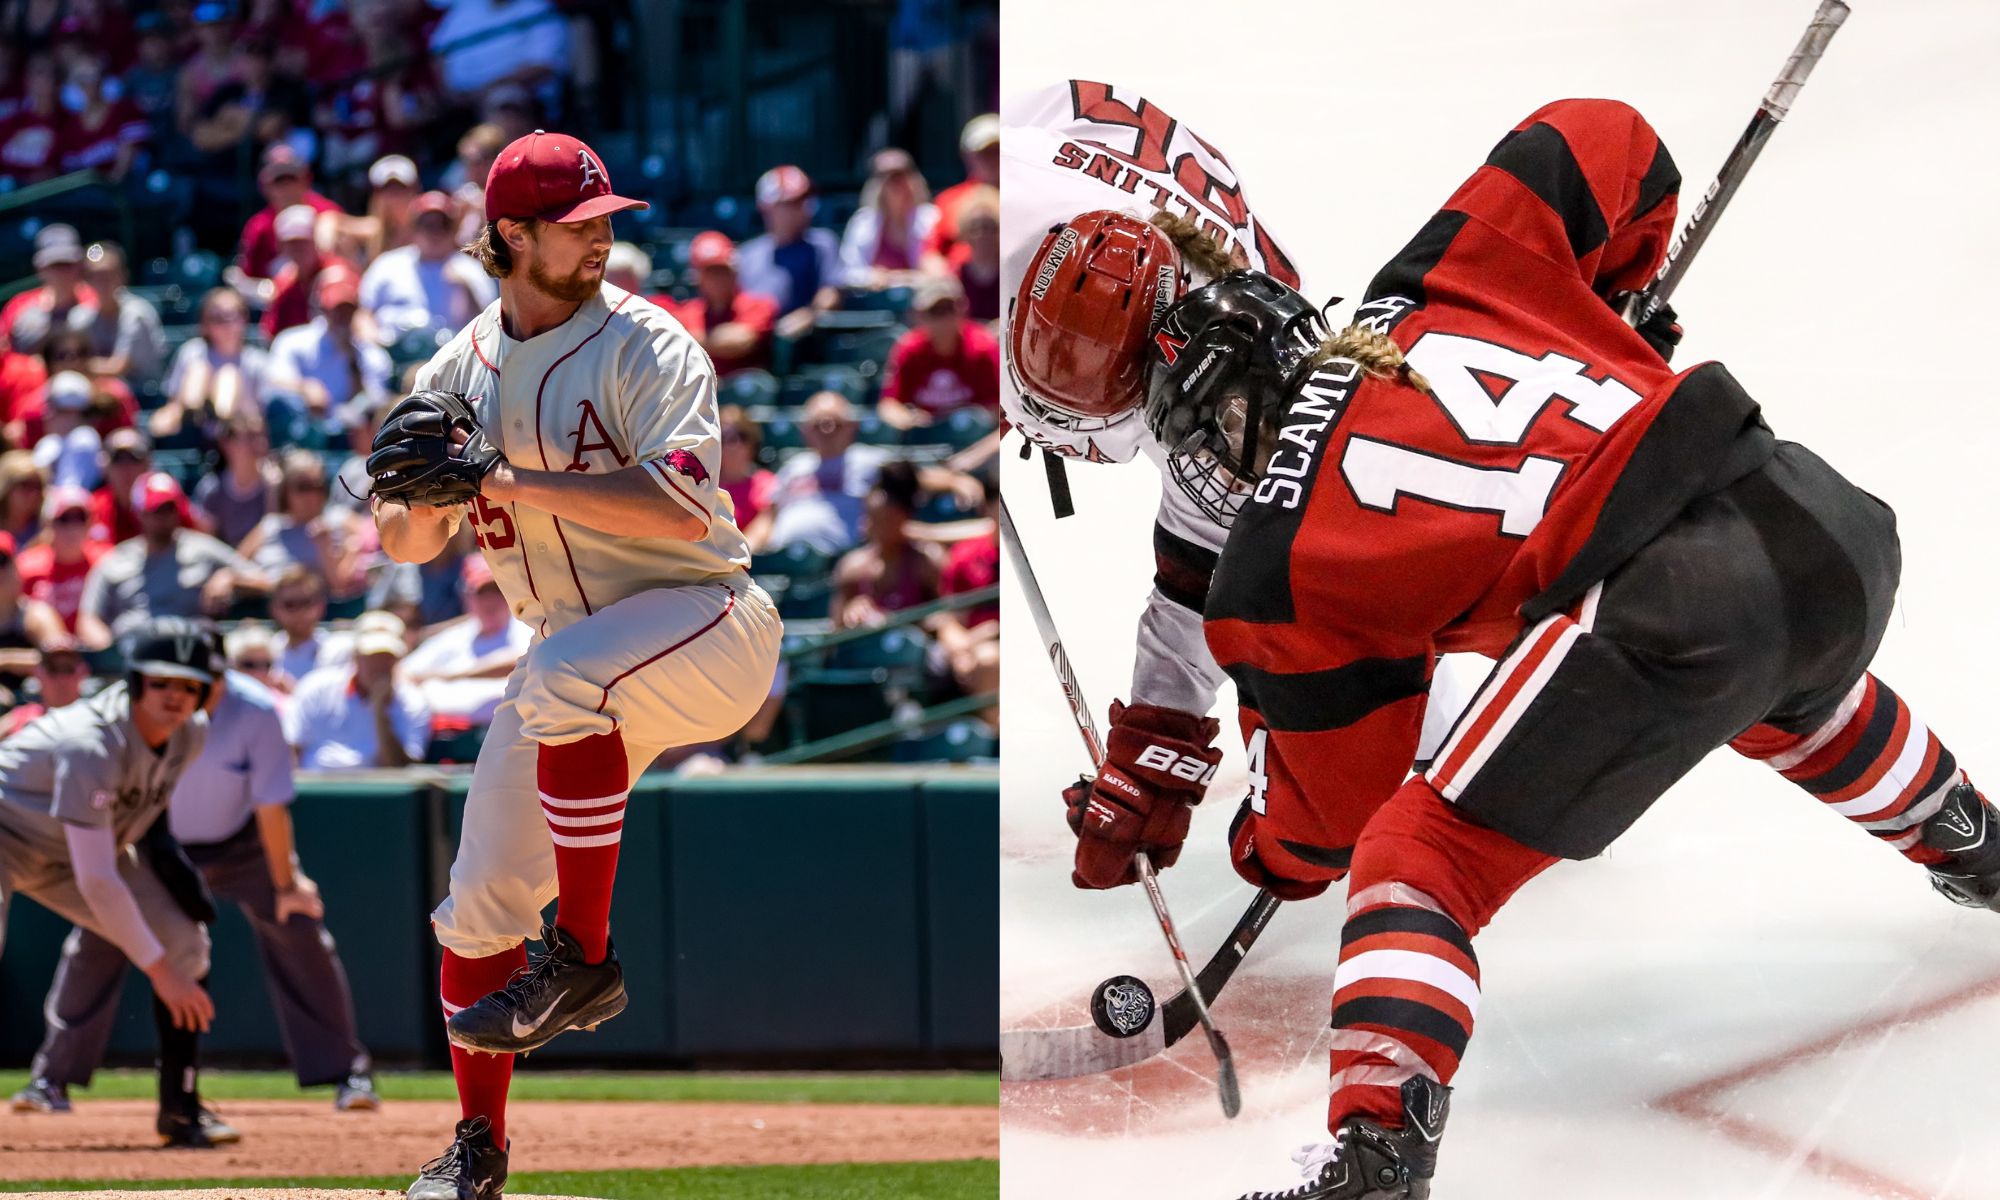 You are currently viewing Ice Hockey vs. Baseball: Which Sport Reigns Supreme in Victoria?